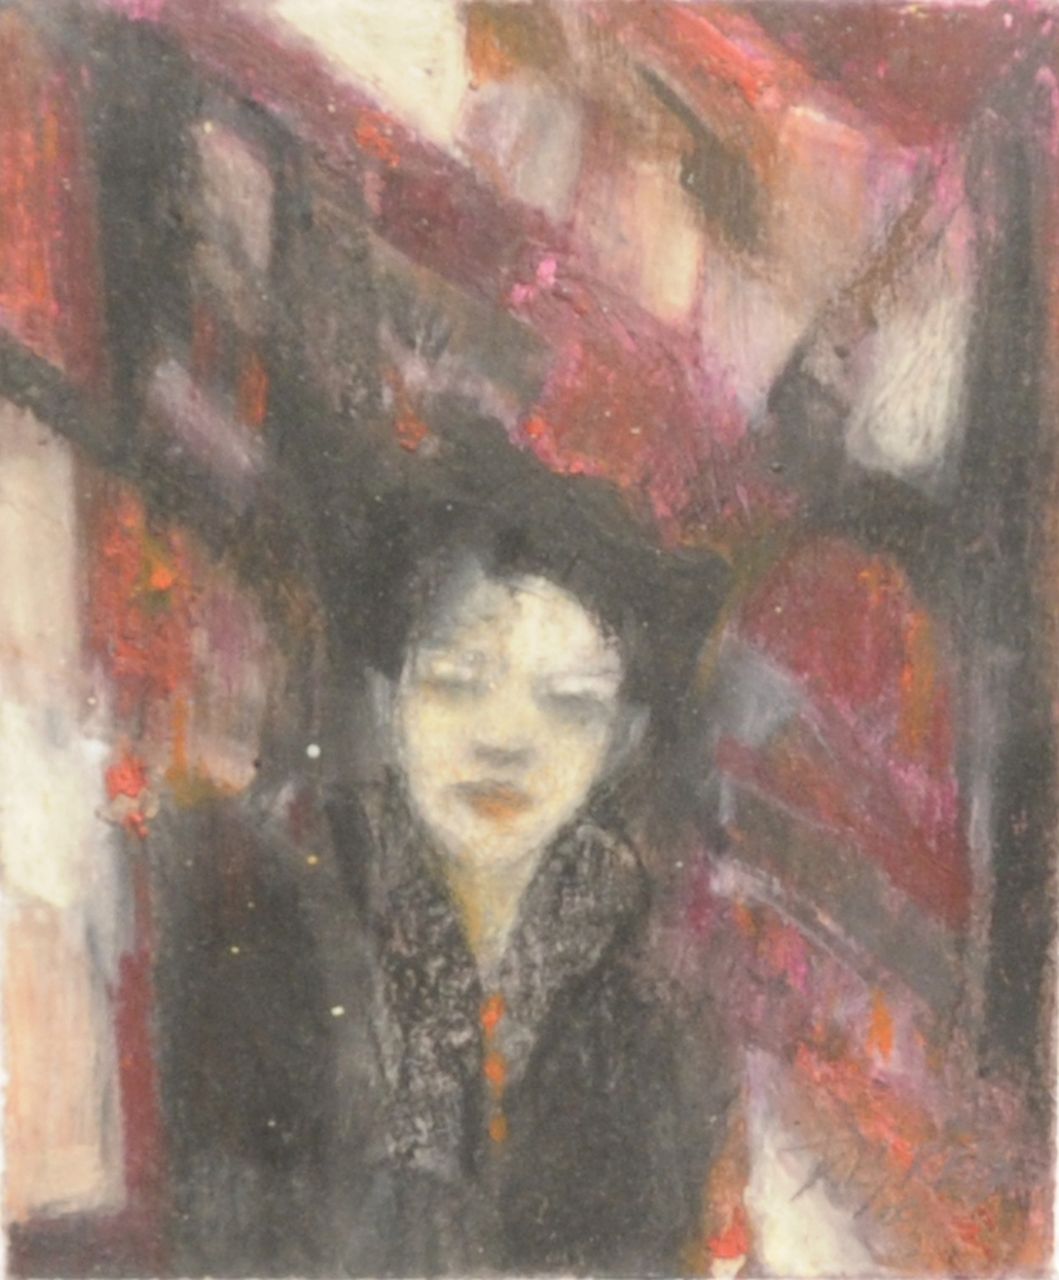 Desrets L.  | Liliana Desrets | Paintings offered for sale | Soledad, wax oil crayon on paper 16.7 x 13.7 cm, signed l.r. and on a label on the reverse and dated '08 and on a label on the reverse 2009